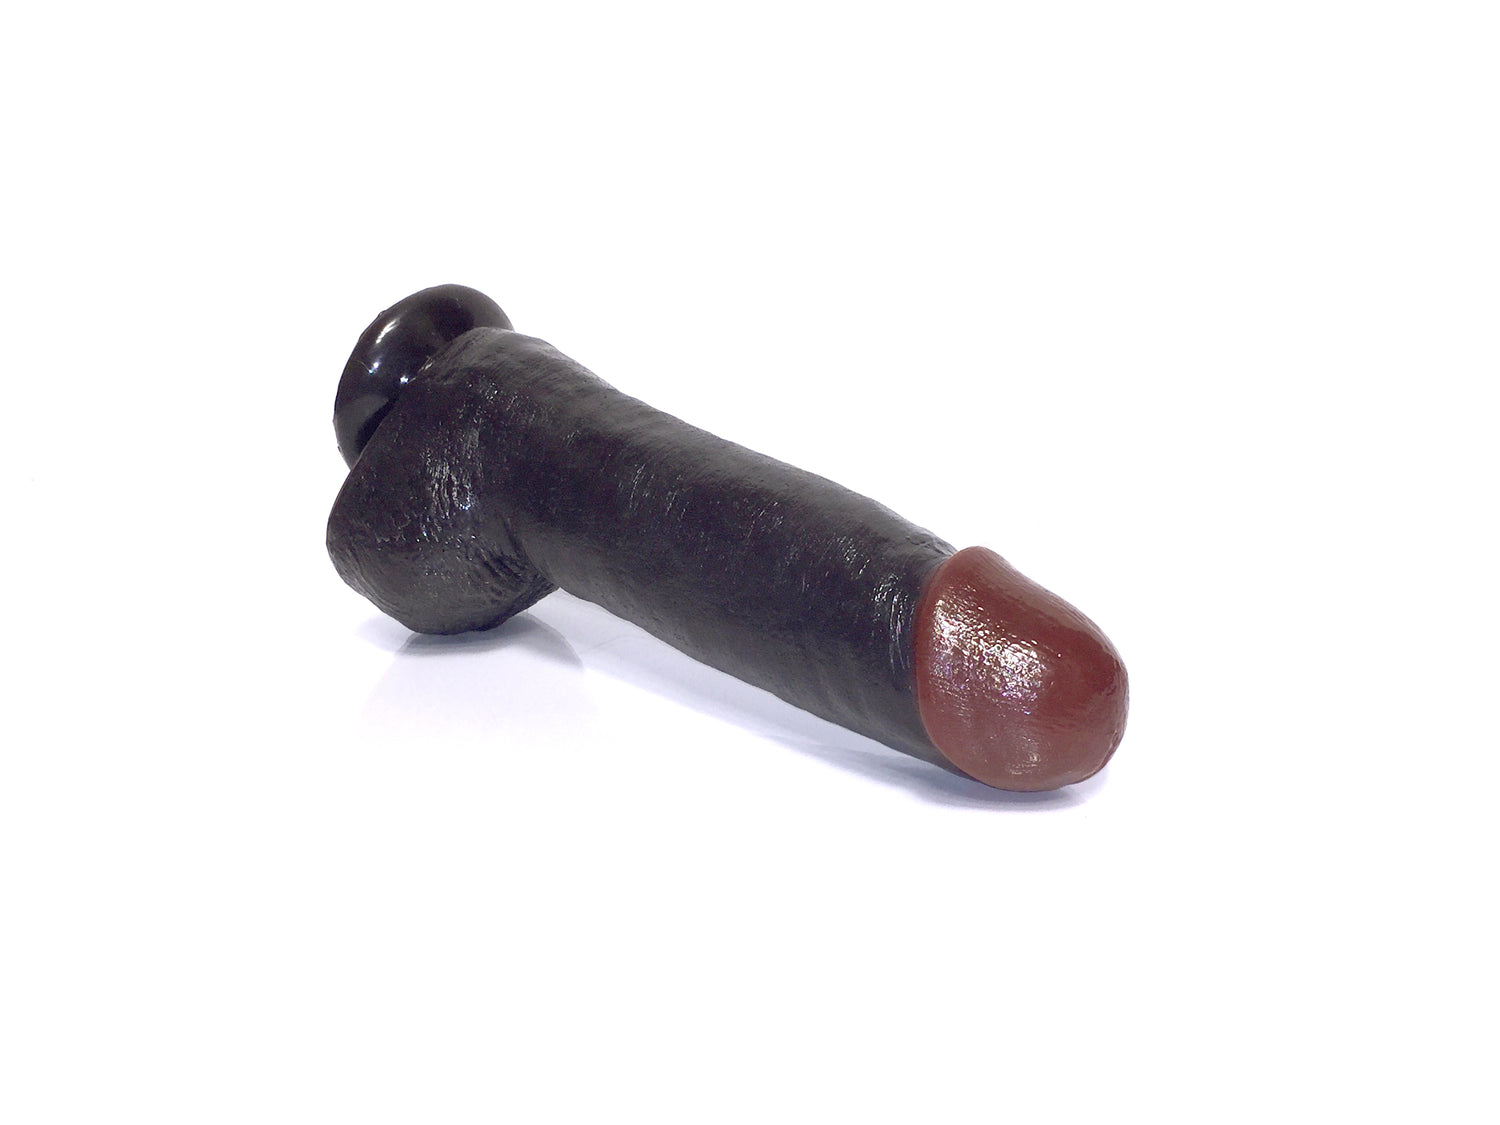 Dildo Black Balled 12in - Just for you desires